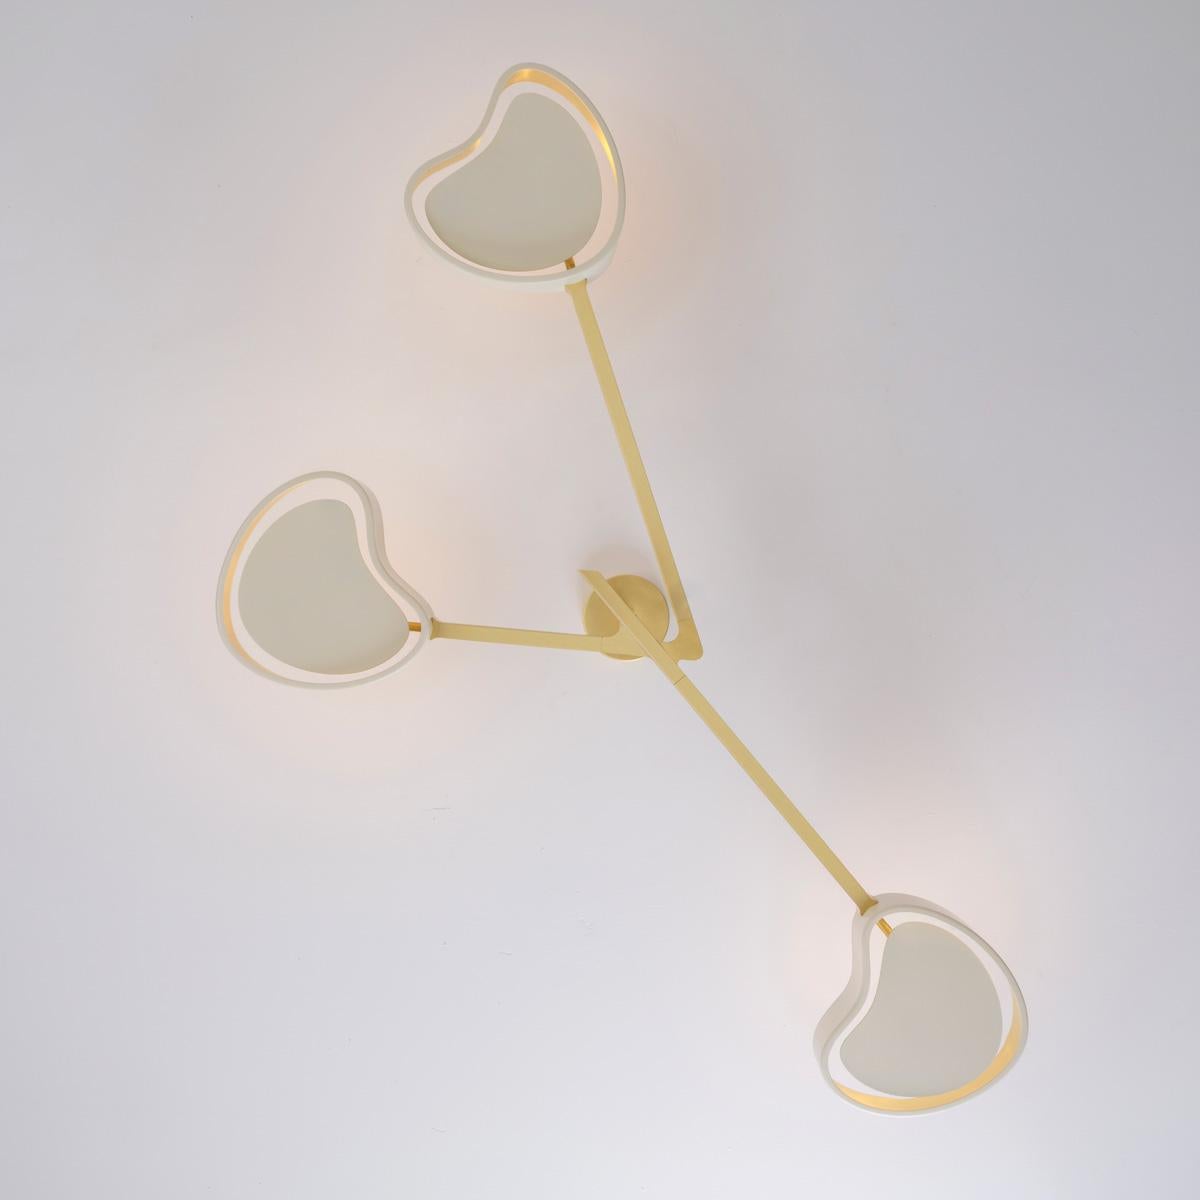 Contemporary Cuore N.3 Ceiling Light by Gaspare Asaro. Satin Brass and Sand White For Sale